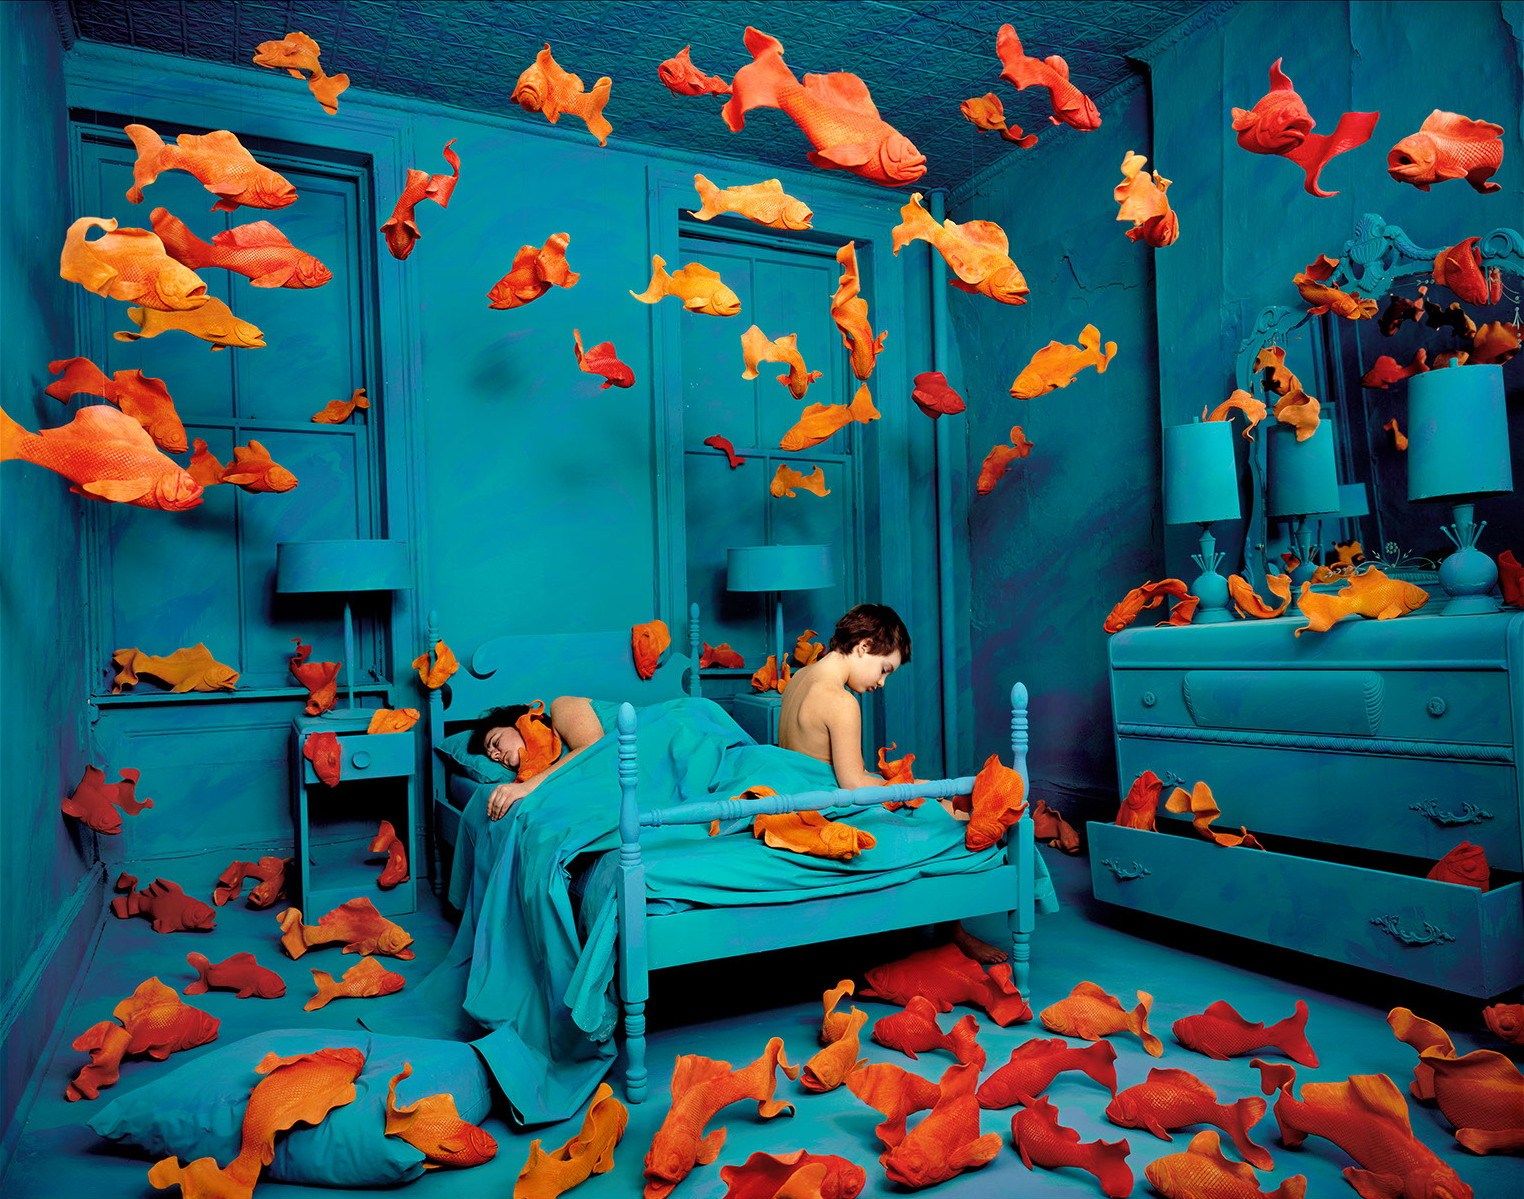 fish themed wallpaper,orange,blue,turquoise,room,teal